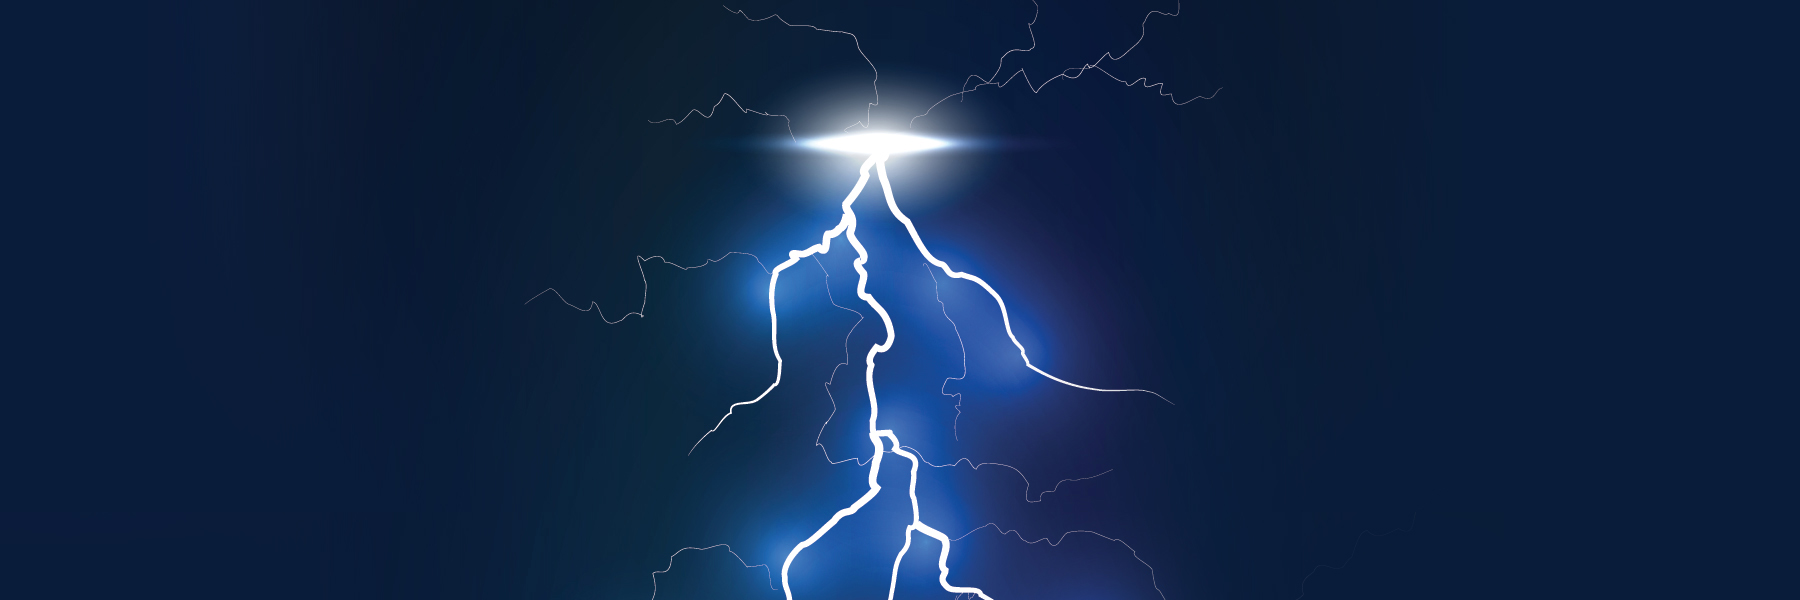 White and electric blue lightning bolt on a dark background,